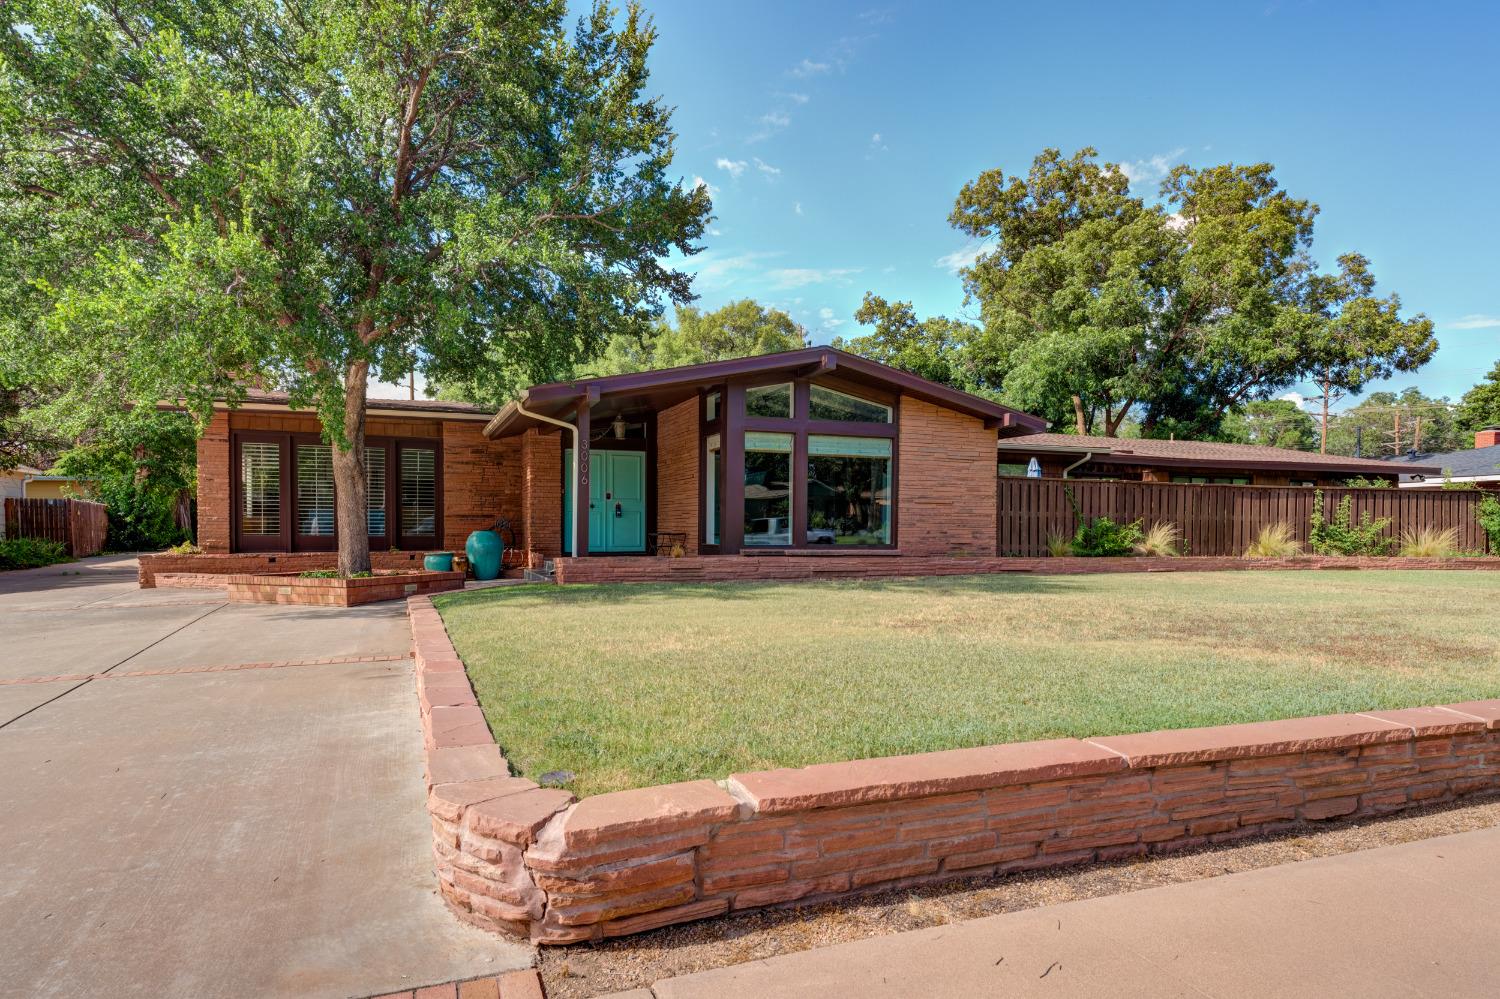 $15K Price Reduction on this Mid-Century modern masterpiece sure to impress; everybody that passes by is charmed by this Tech Terrace beauty. Rarely does such a special property become available on one of the most sought-after streets with a view of the park. Completely renovated in 2018; flooring, bathrooms, windows, window treatments, 7' privacy fence, soffit/fascia, new lighting, interior/exterior paint, kitchen w/subway backsplash & hardware, truly too many upgrades to list in this sophisticated luxury home. You'll fall in love as you open the double doors into a light & bright floor plan, captivating ceilings & finishes, cozy fireplace with secluded conversation area. Formal dining adjacent to a gourmet kitchen w/casual dining area. Spacious master suite w/spa inspired bath airflow tub, separate shower & his & her closets. Separate guest quarters; 4th bedroom & bathroom with full kitchen & washer/dryer. Walking distance to Roscoe Wilson, Hutch, & TTU; near medical district.